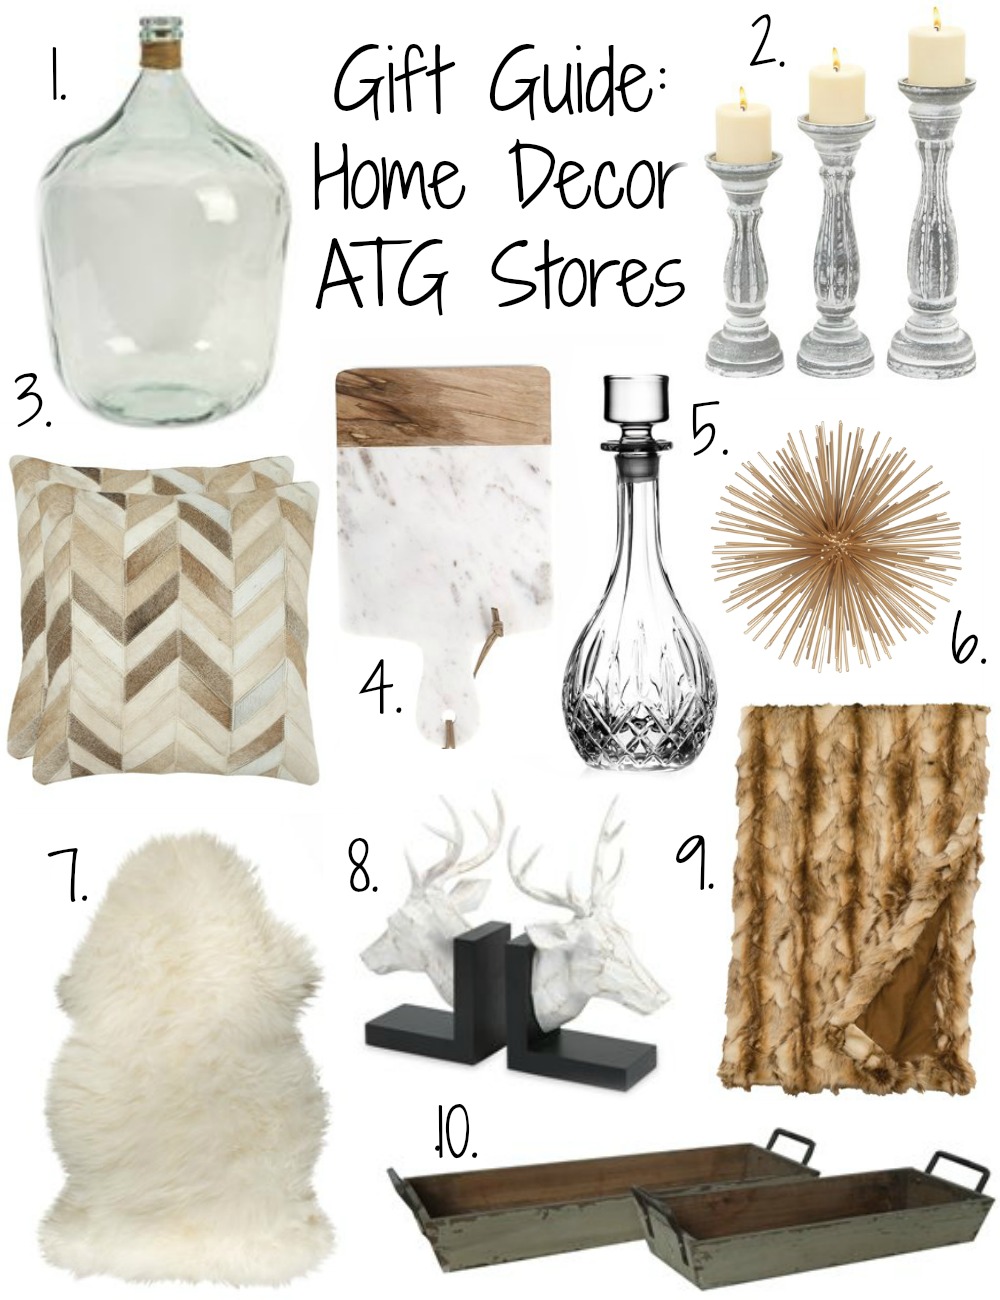 atg-stores-gift-guide Gift Guide: 10 Home Decor Gifts with ATG Stores by North Carolina style blogger Coffee Beans and Bobby Pins